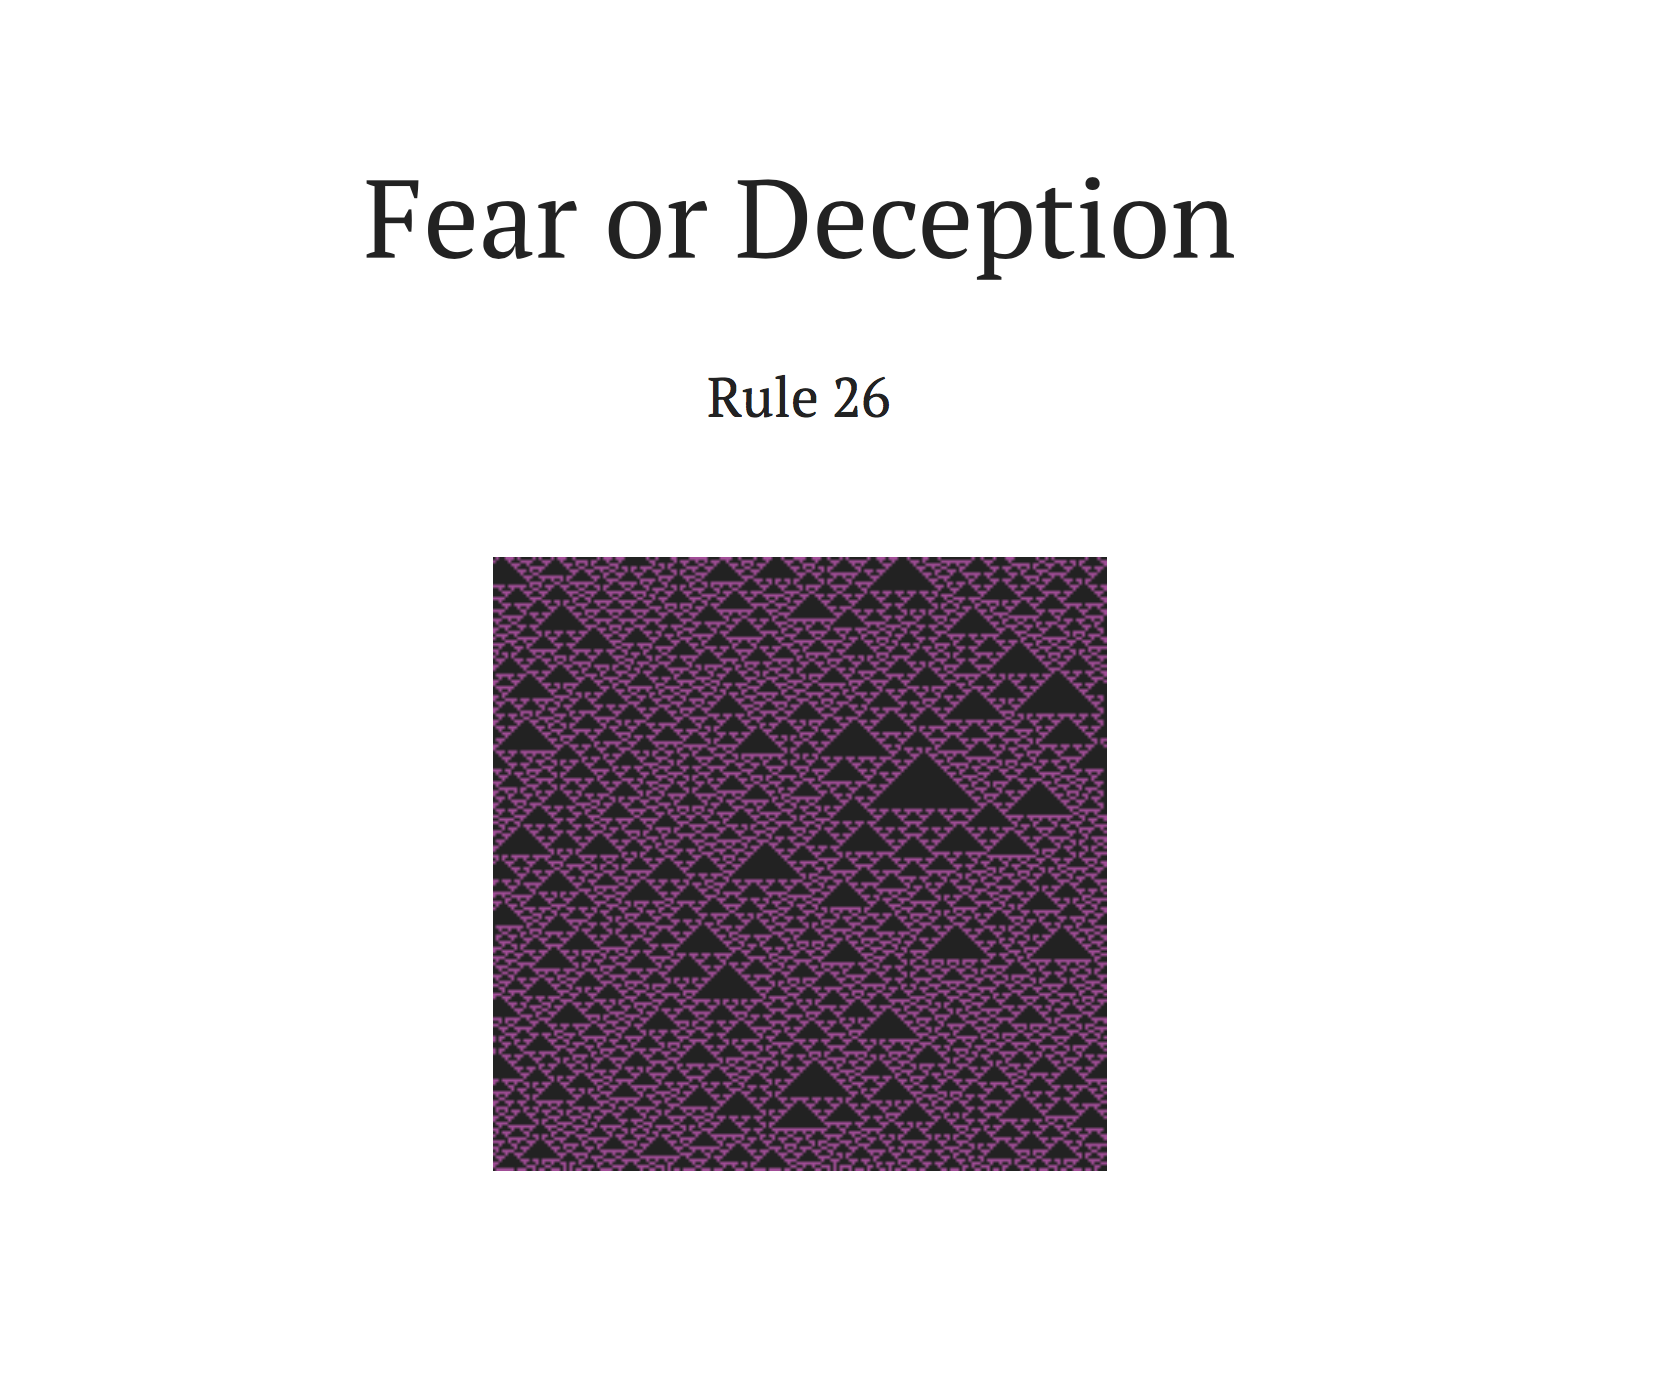 Title page from a generated book: Fear or Deception